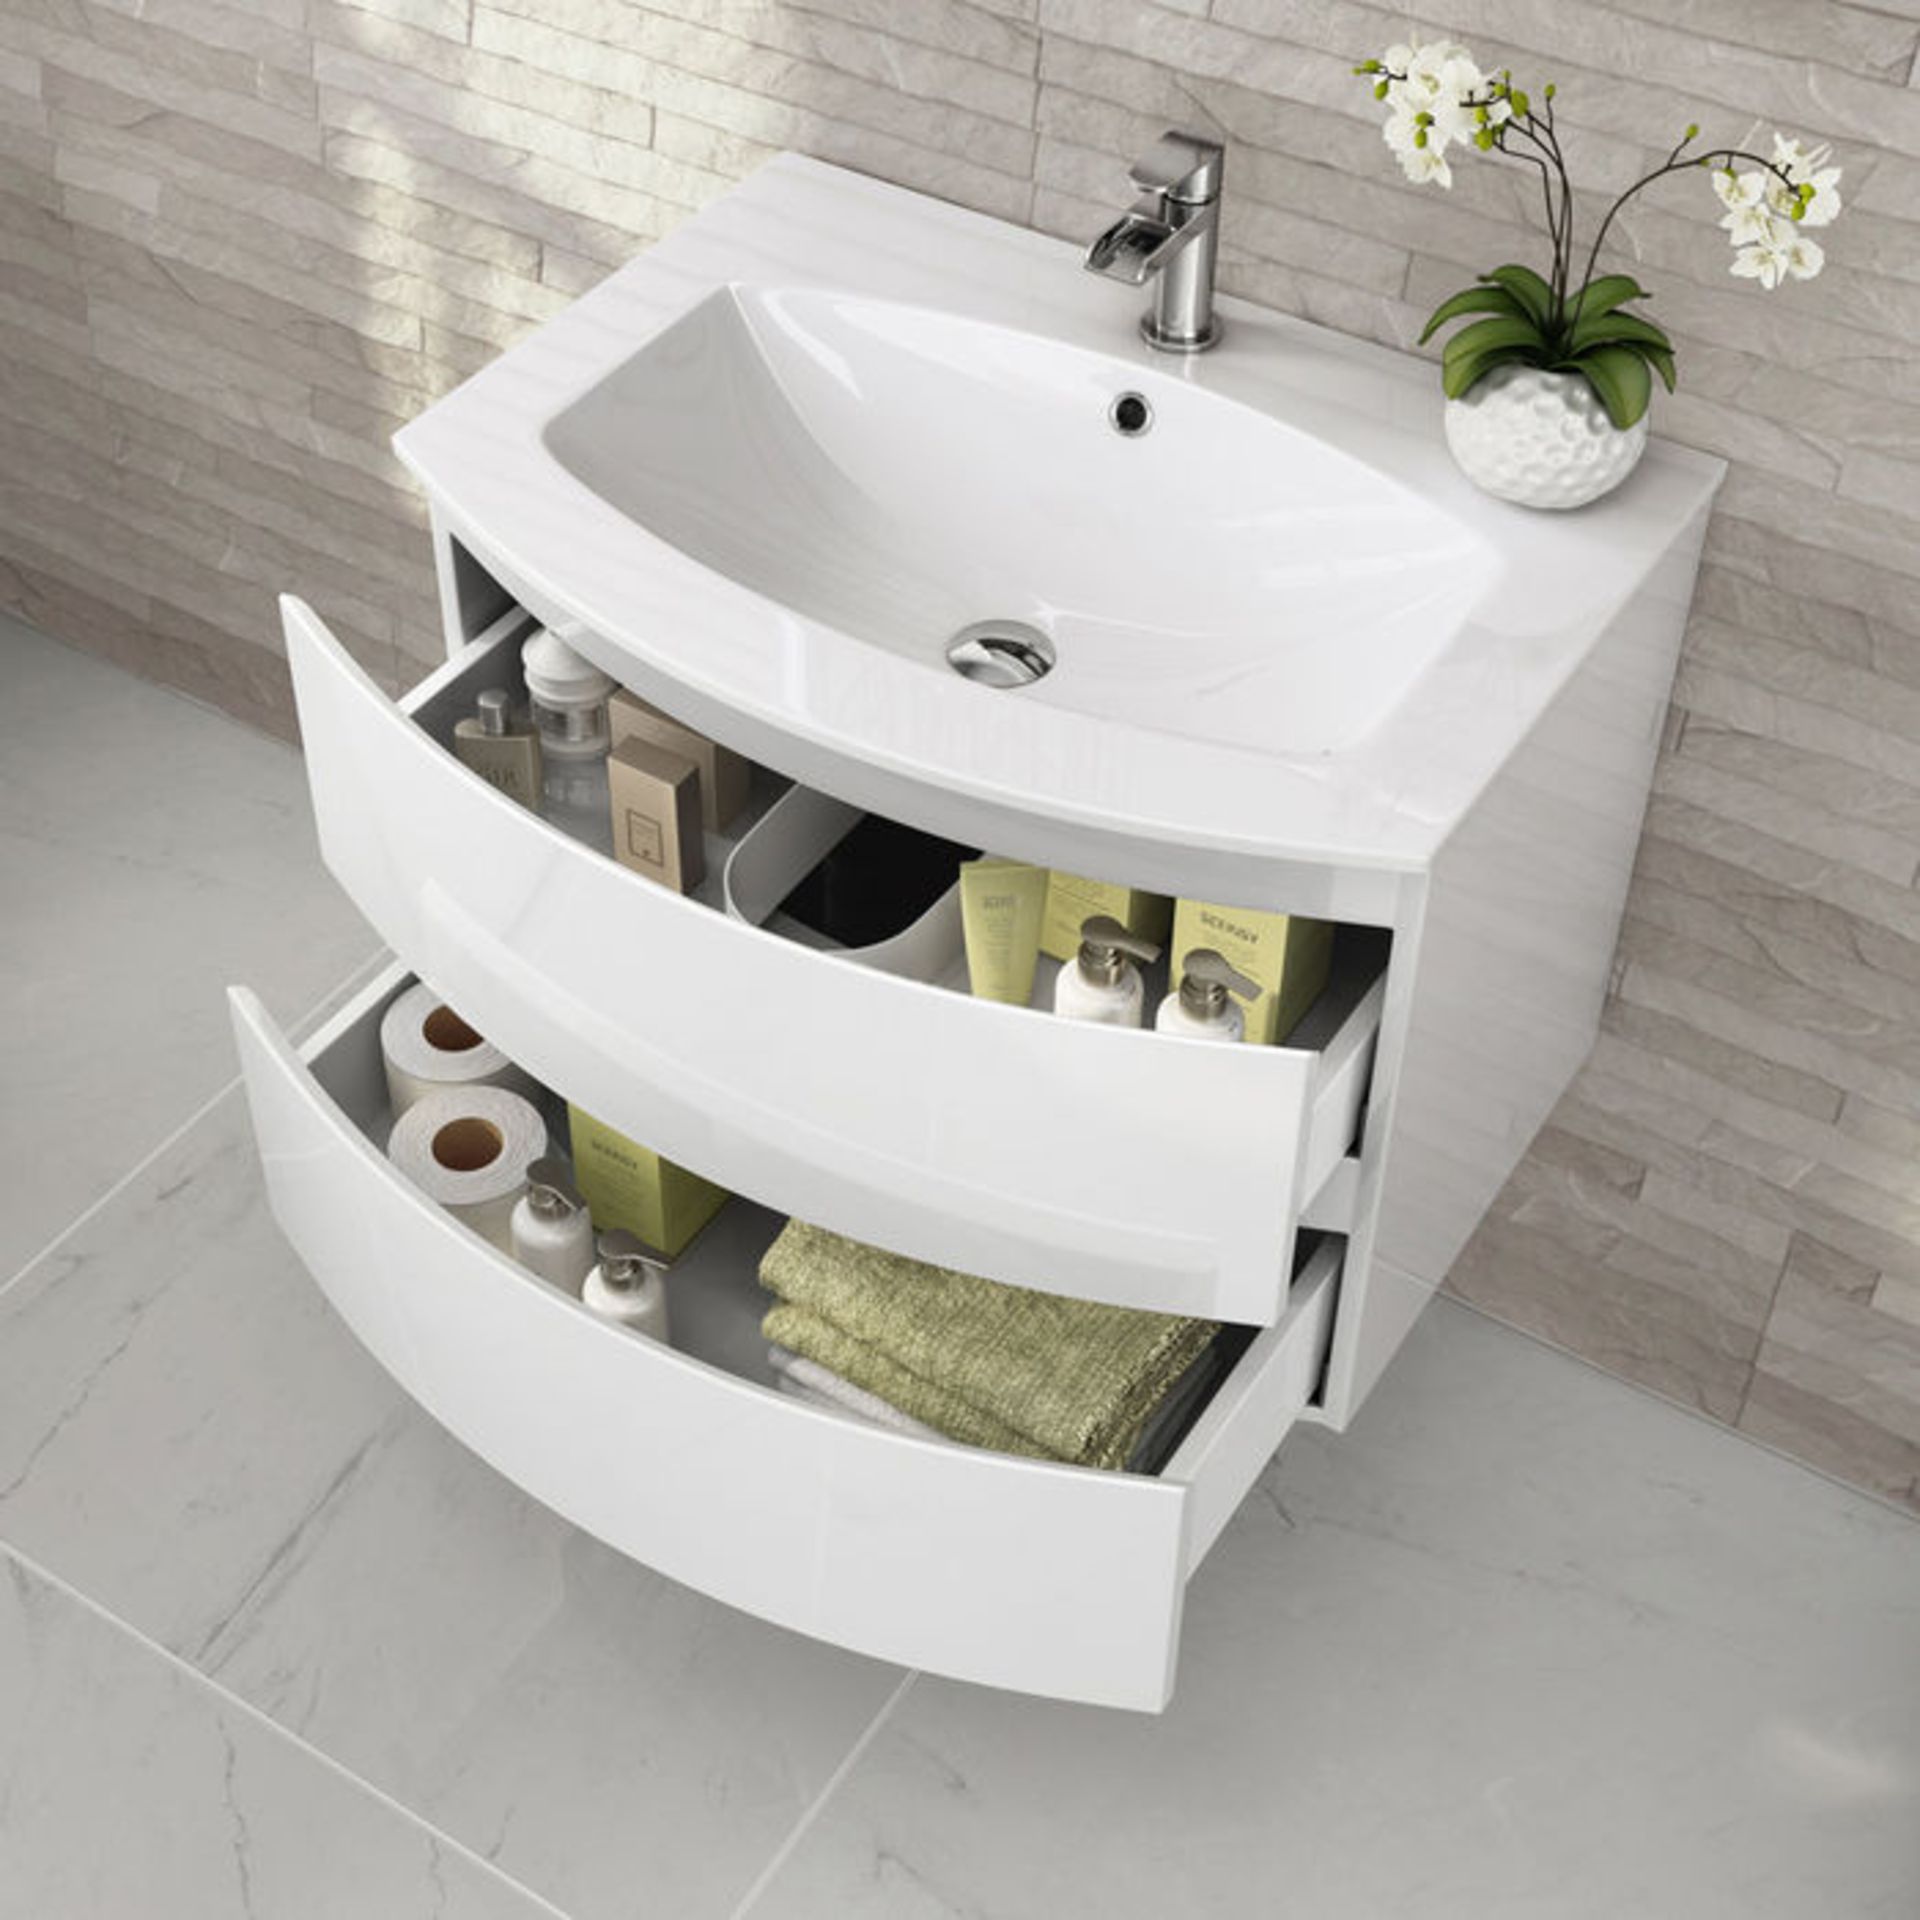 New 700mm Amelie High Gloss White Curved Vanity Unit - Wall Hung. Rrp £749.99.Comes Complete ... - Image 3 of 4